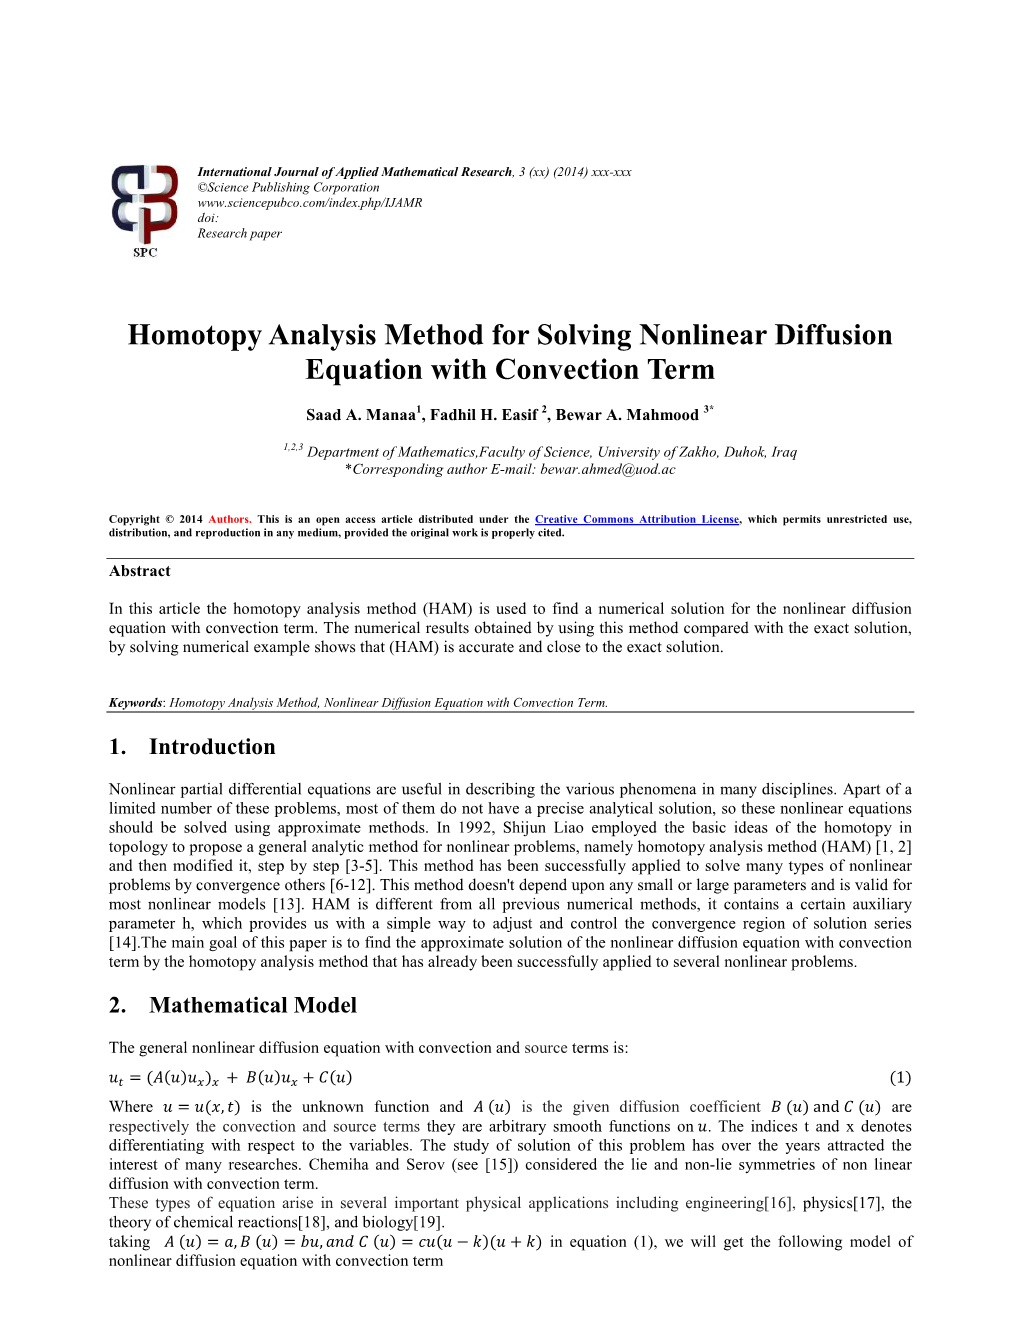 Homotopy Analysis Method for Solving Nonlinear Diffusion Equation with Convection Term